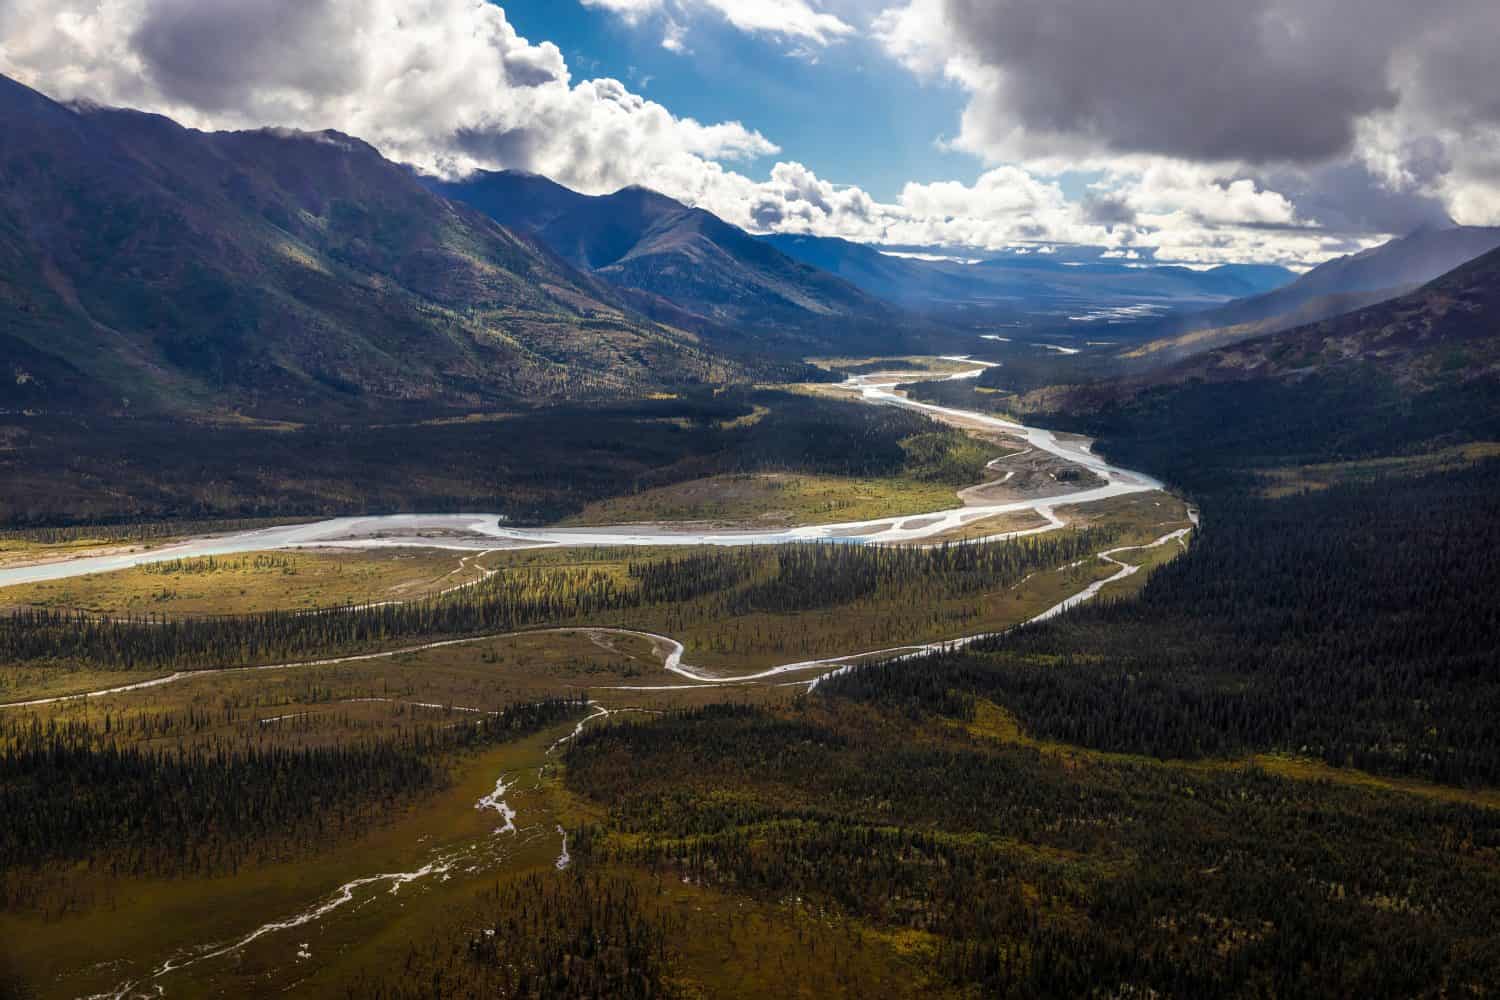 Beautiful landscape view of Gates of the Arctic National Park in northern Alaska.